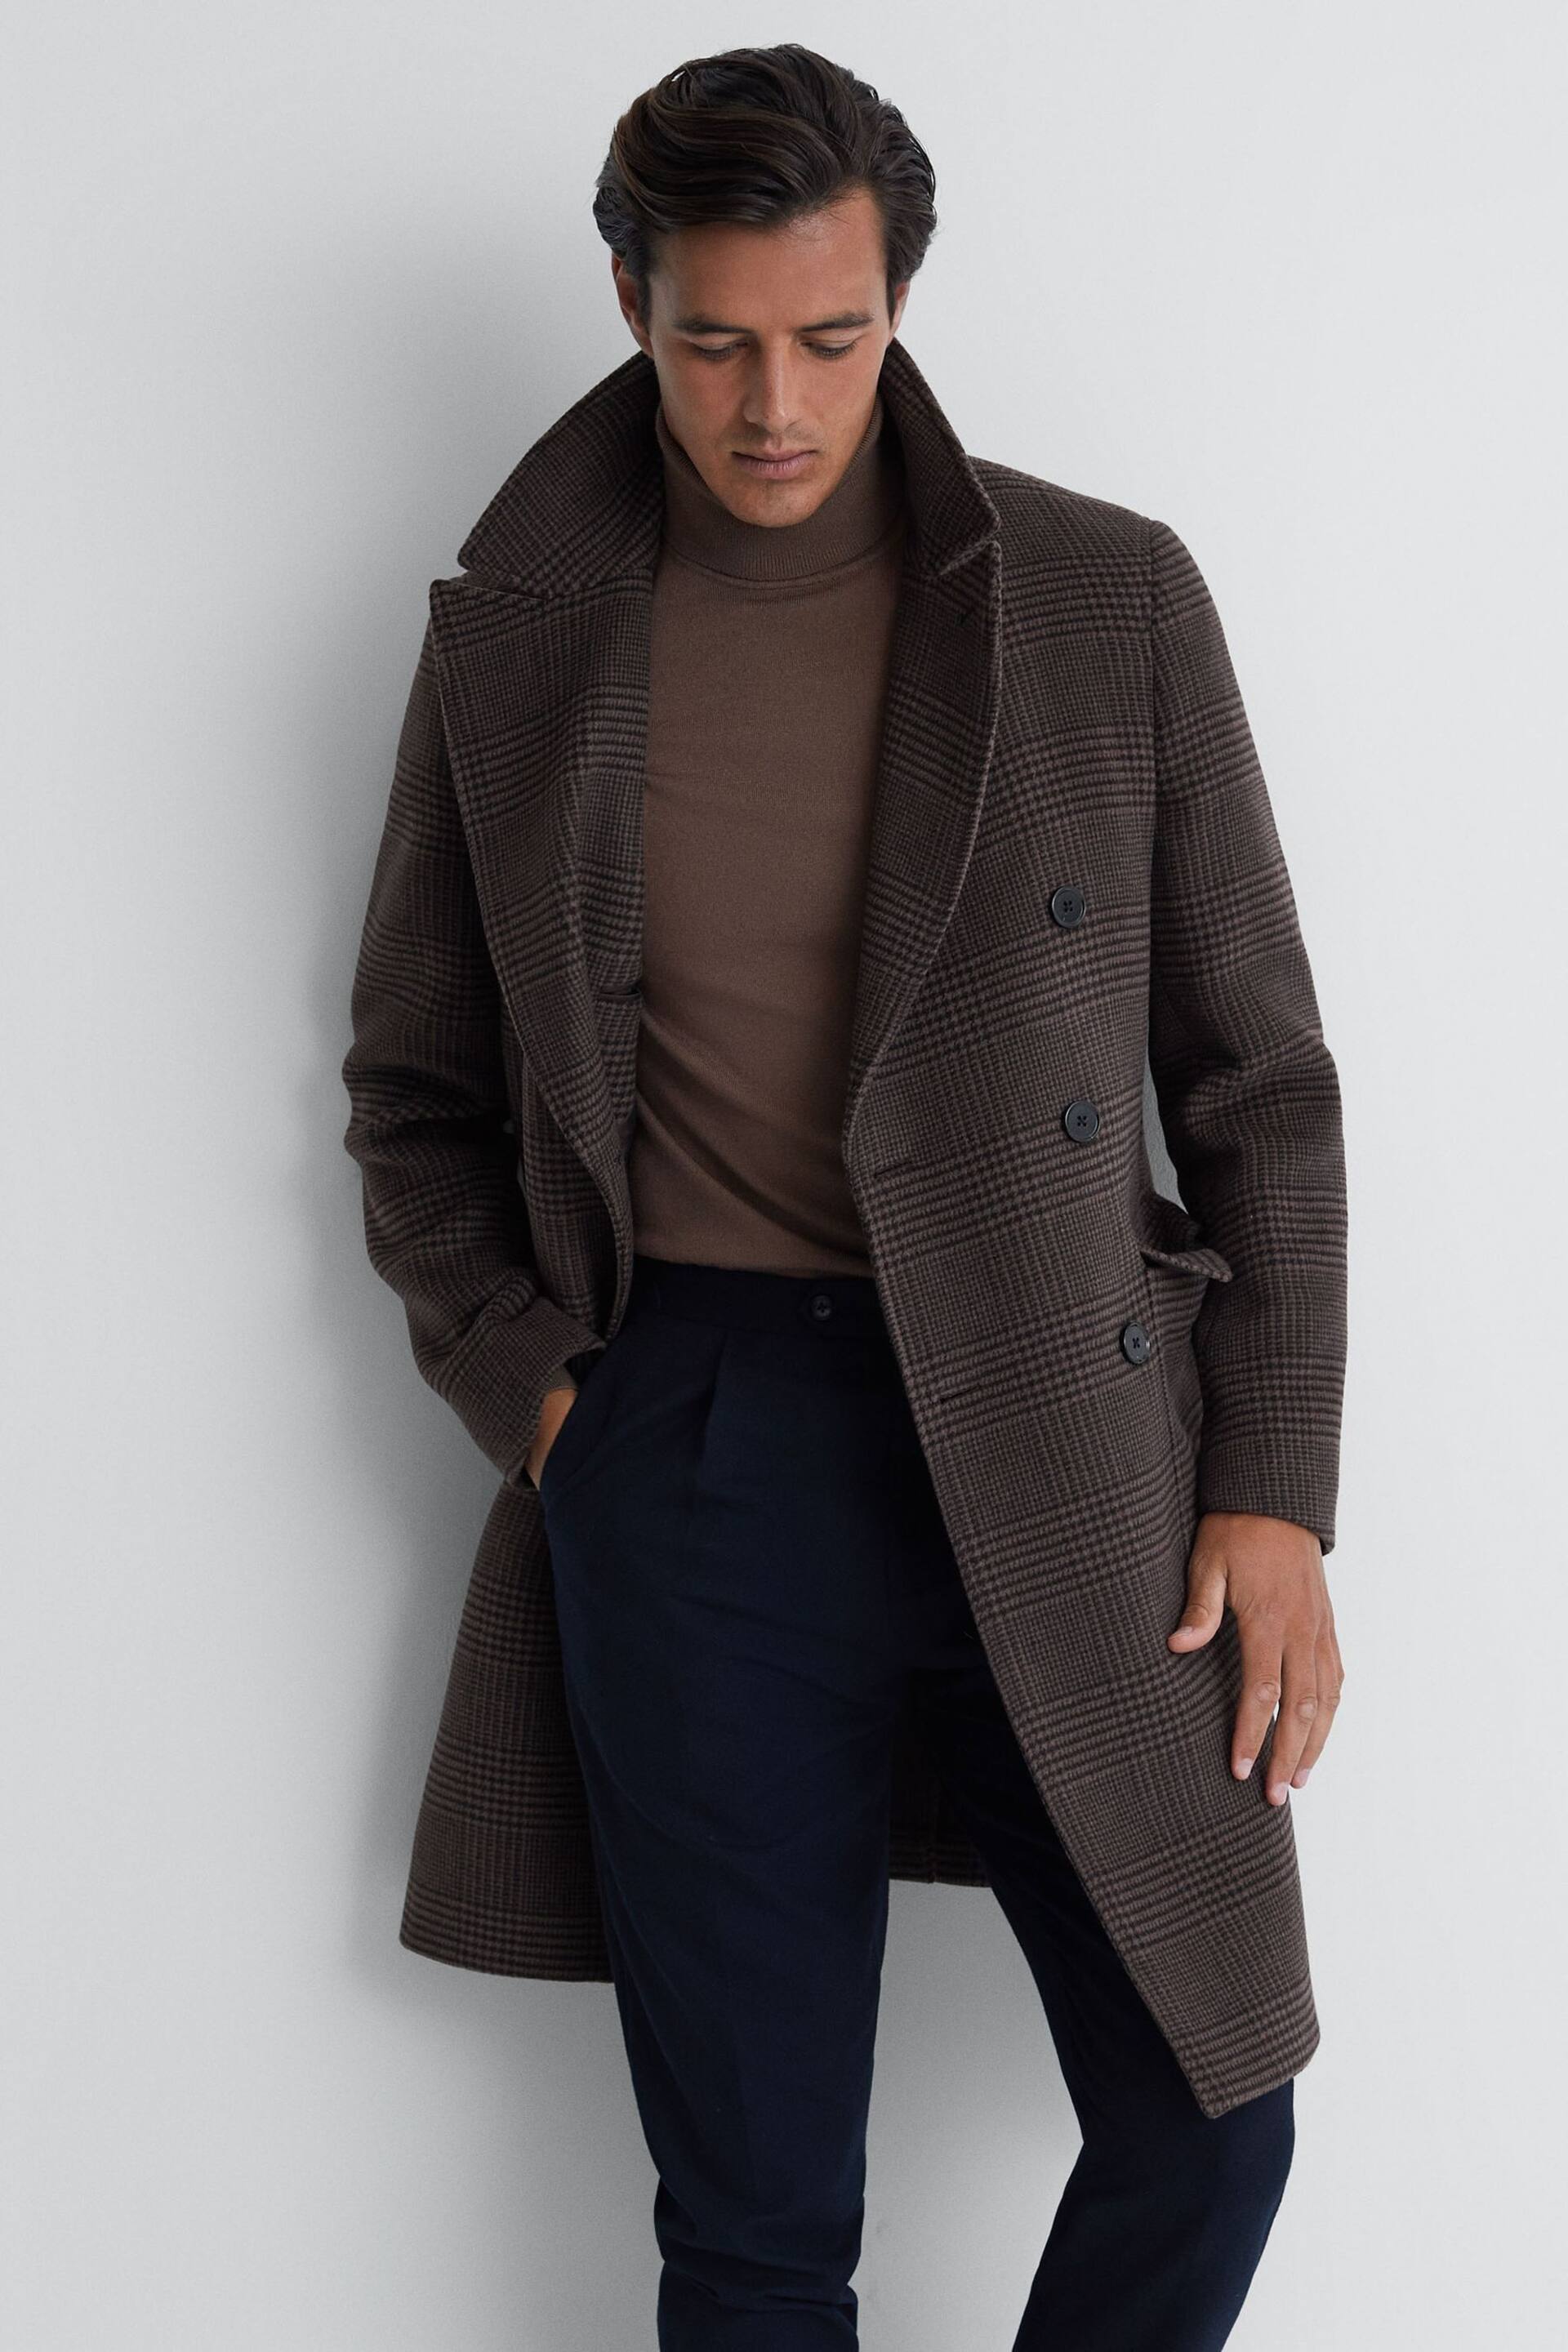 Reiss Brown Date Wool Check Double Breasted Coat - Image 1 of 5